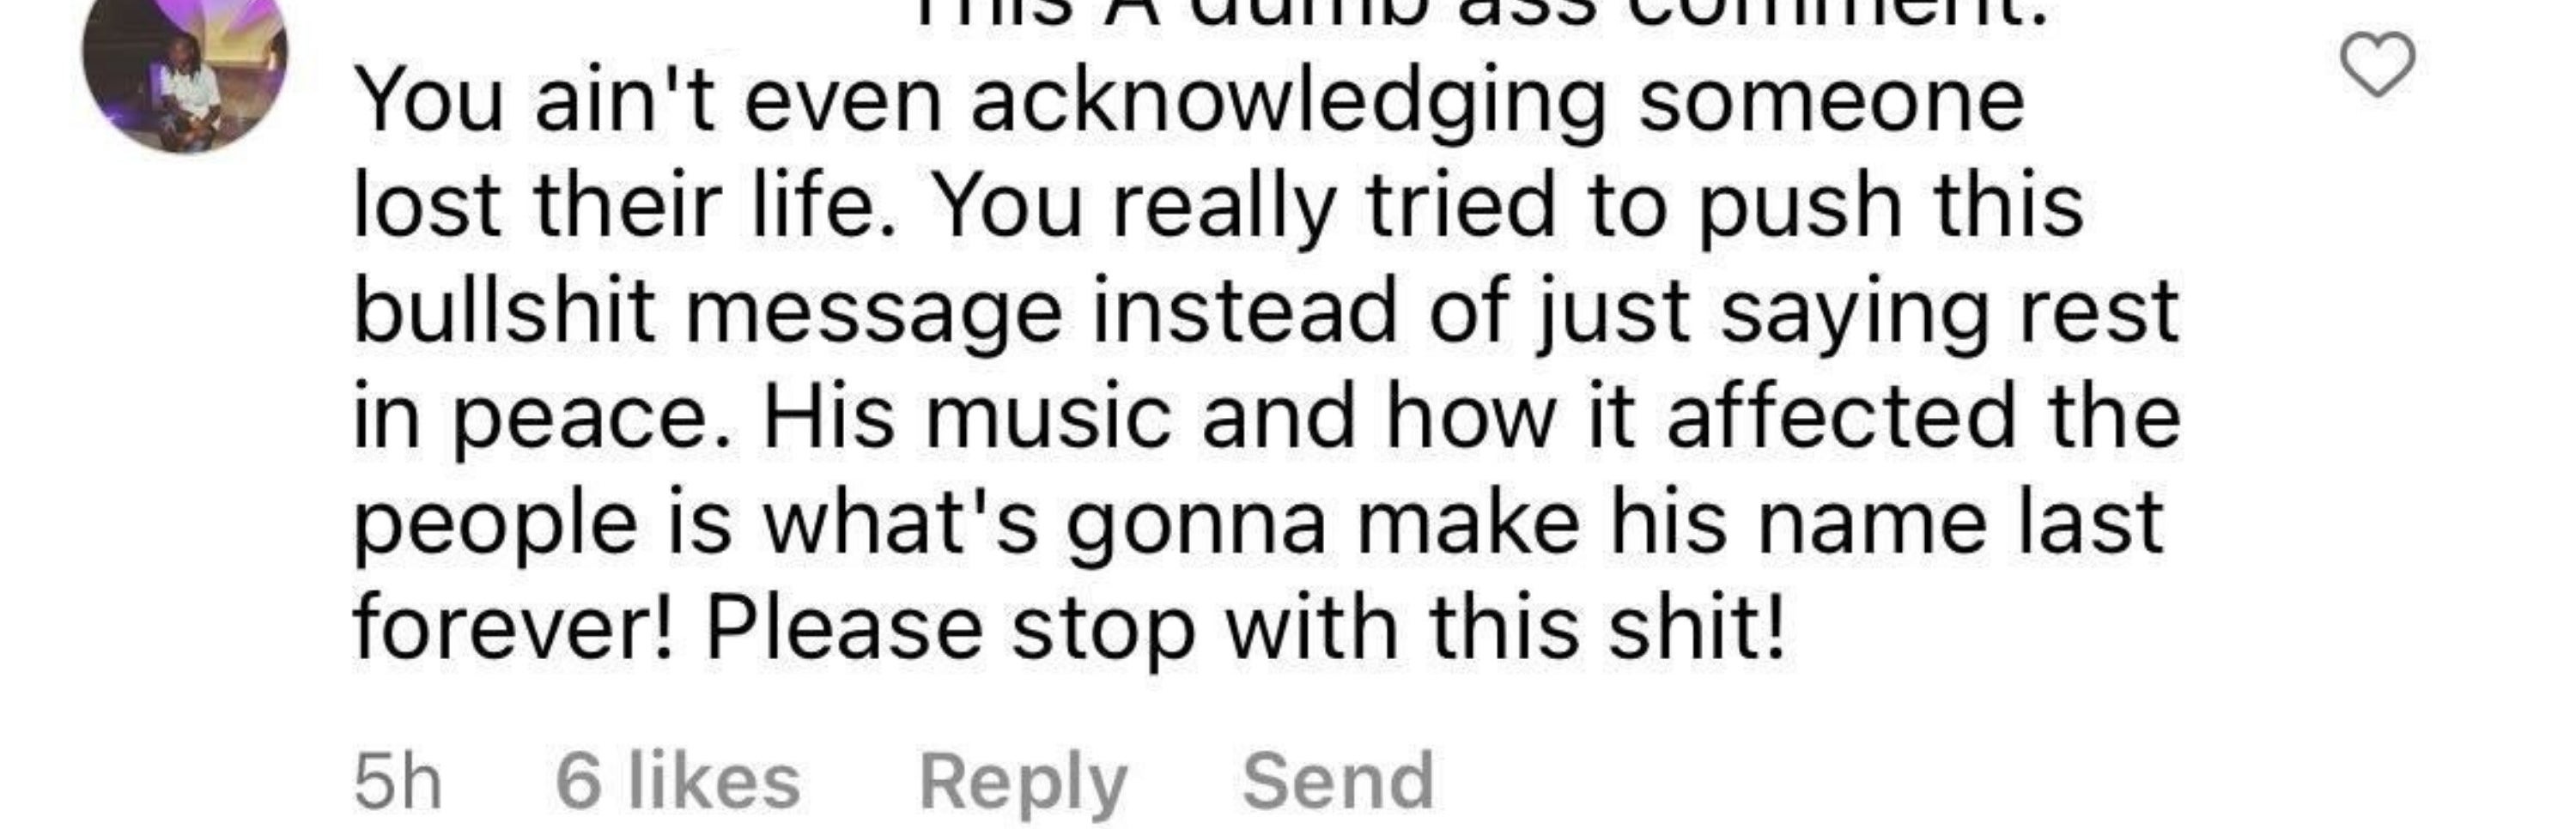 Comment that says: This A dumb ass comment; you ain&#x27;t even acknowledging someone lost their life; you really tried to push this bullshit message instead of just saying rest in peace&quot;